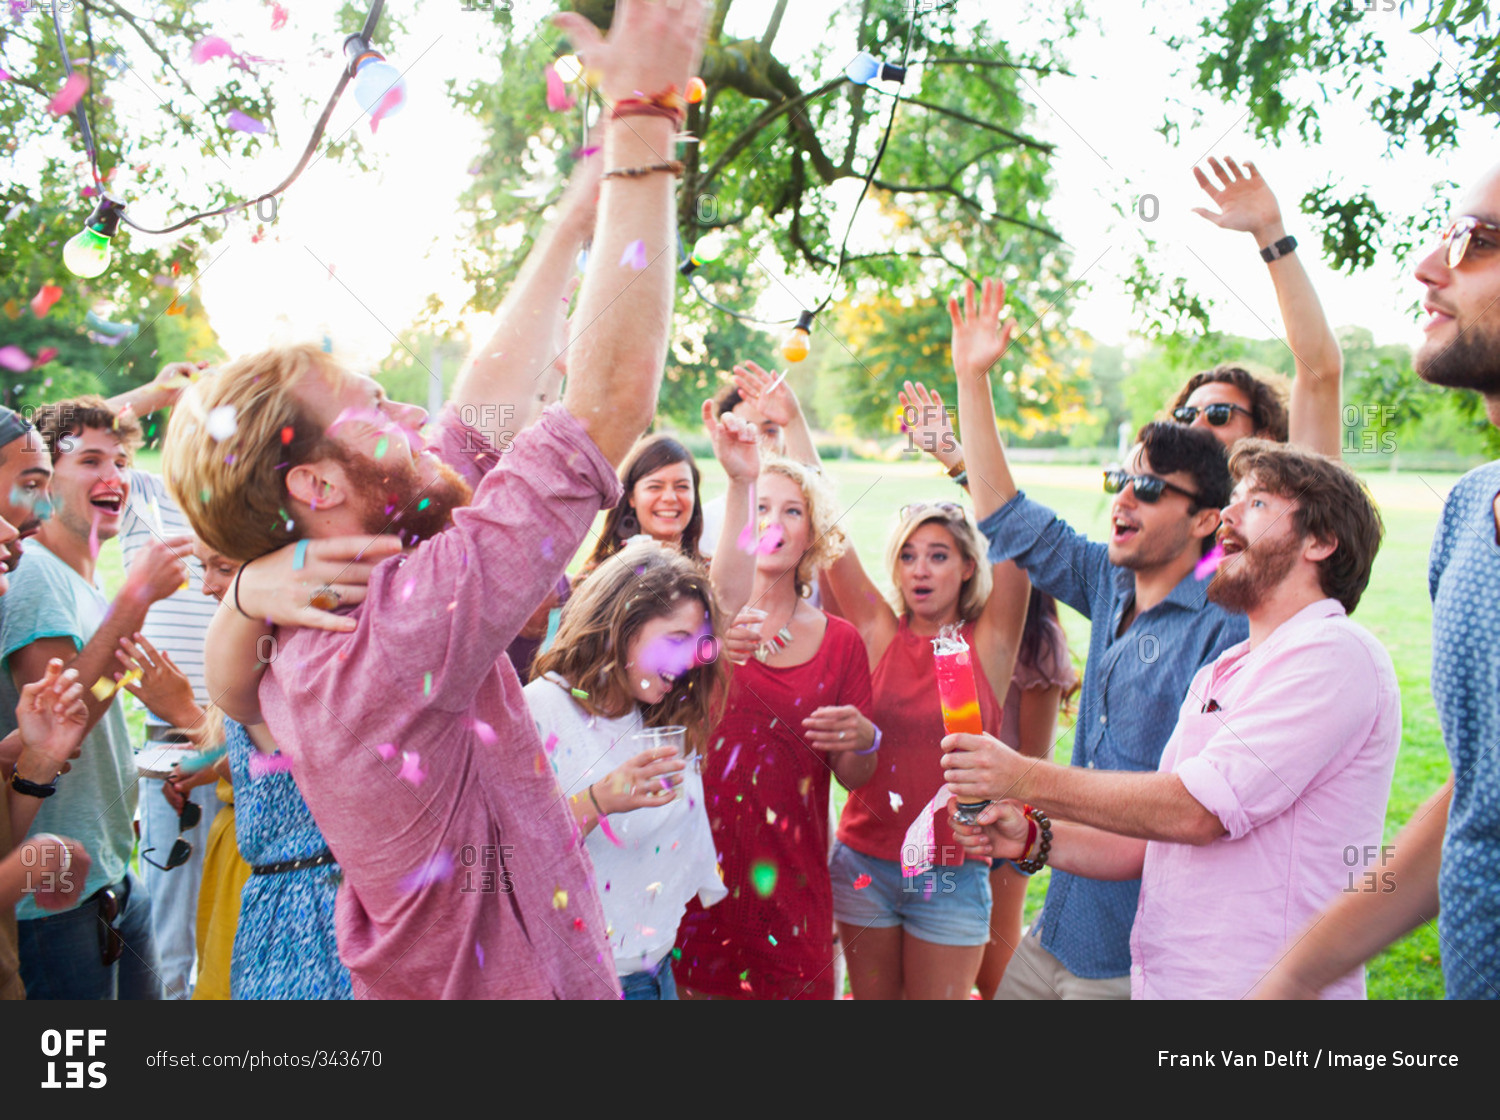 Adult crowd celebrating with arms raised at sunset party in park